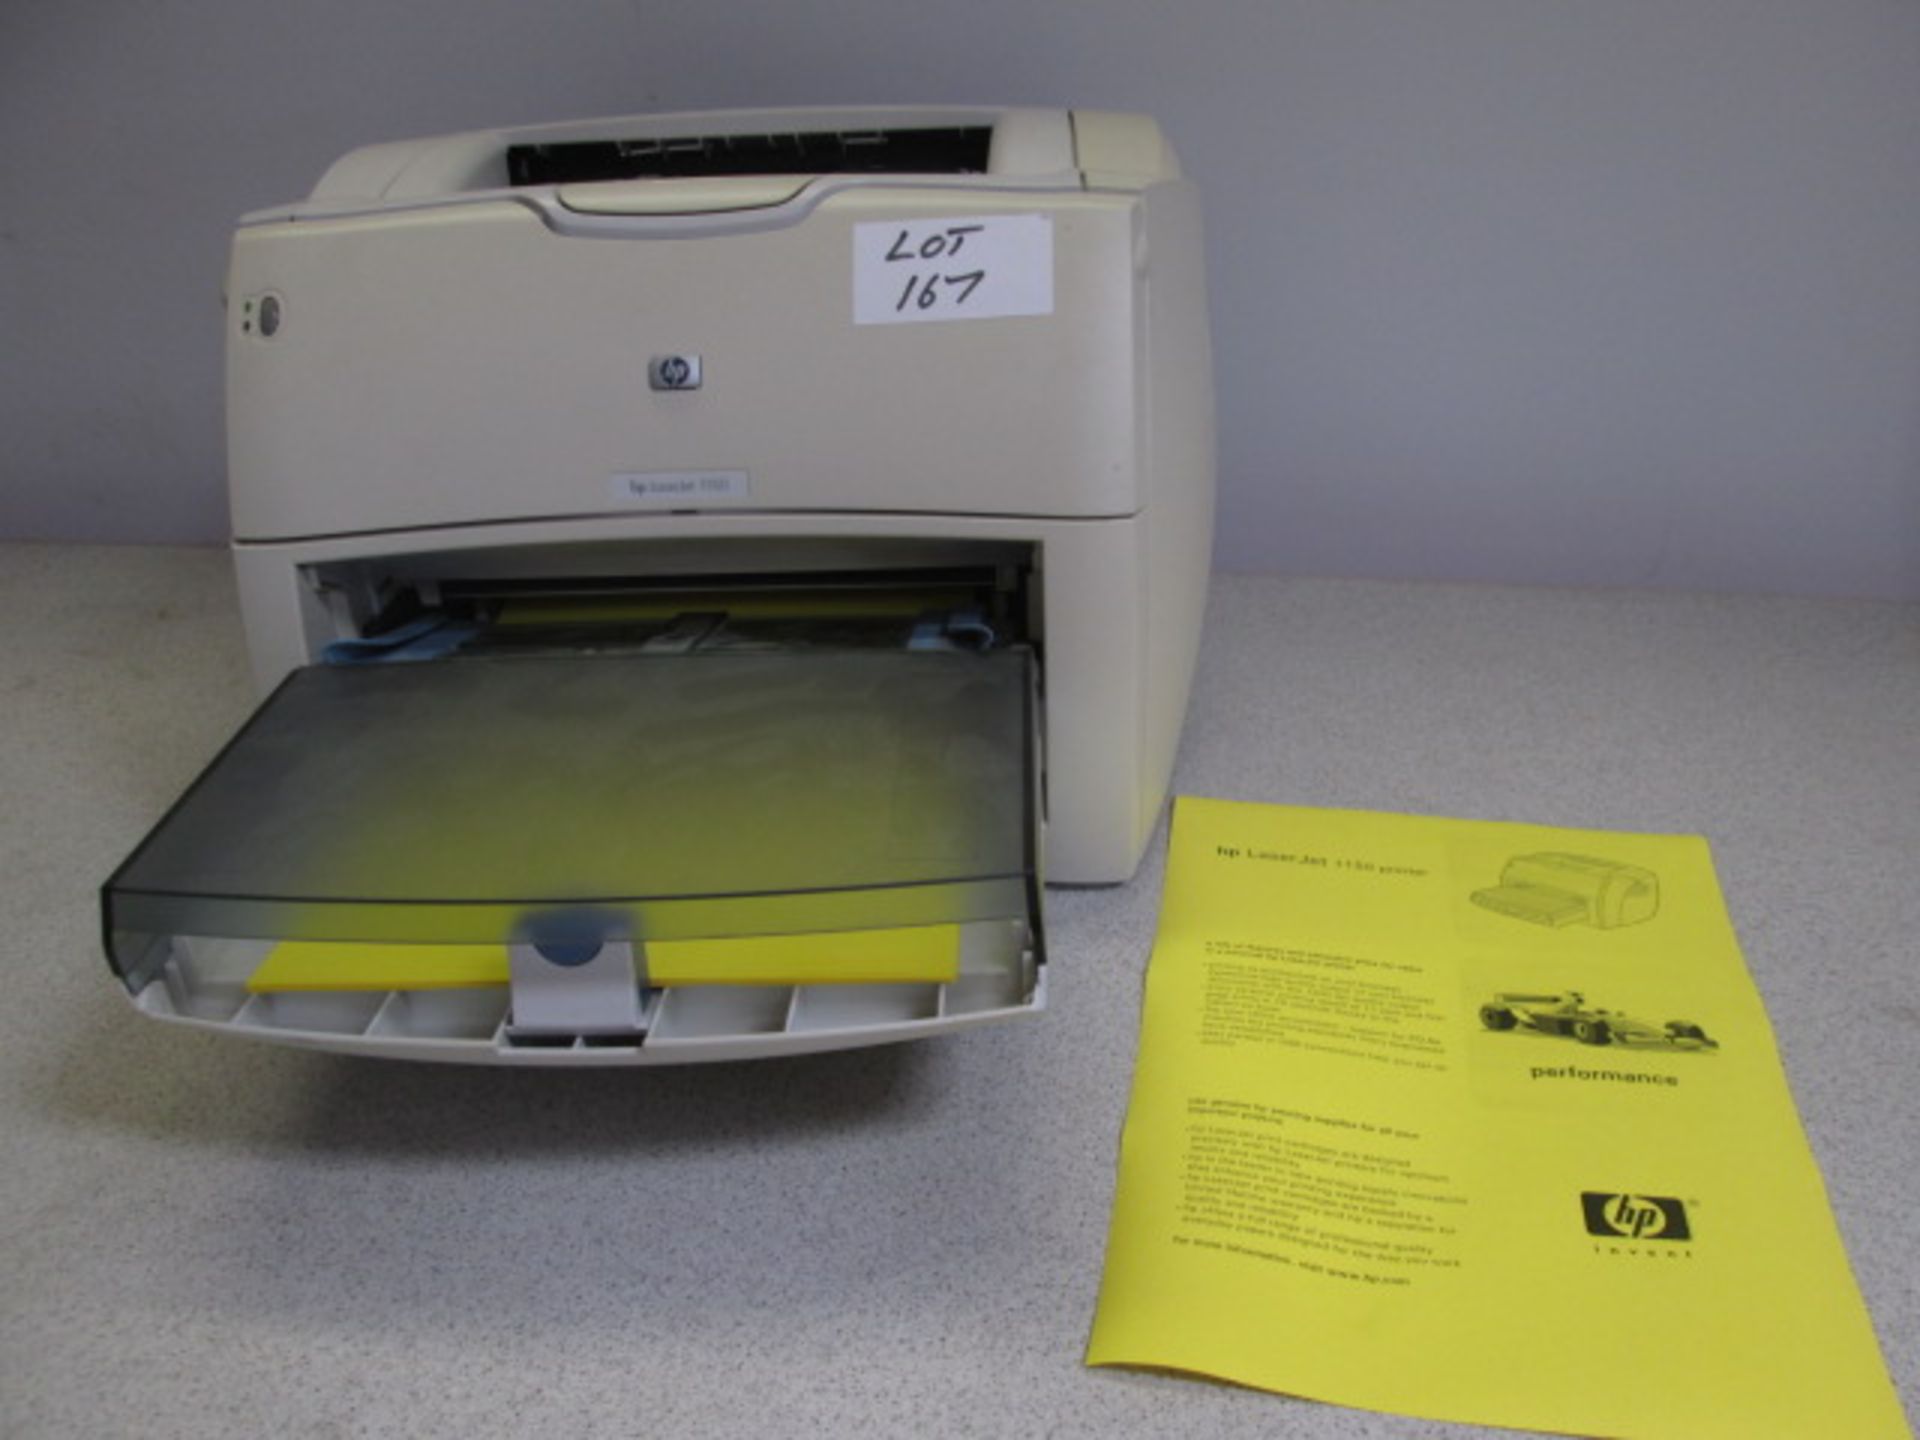 HP Laserjet 1150 Printer. Comes with Power Supply